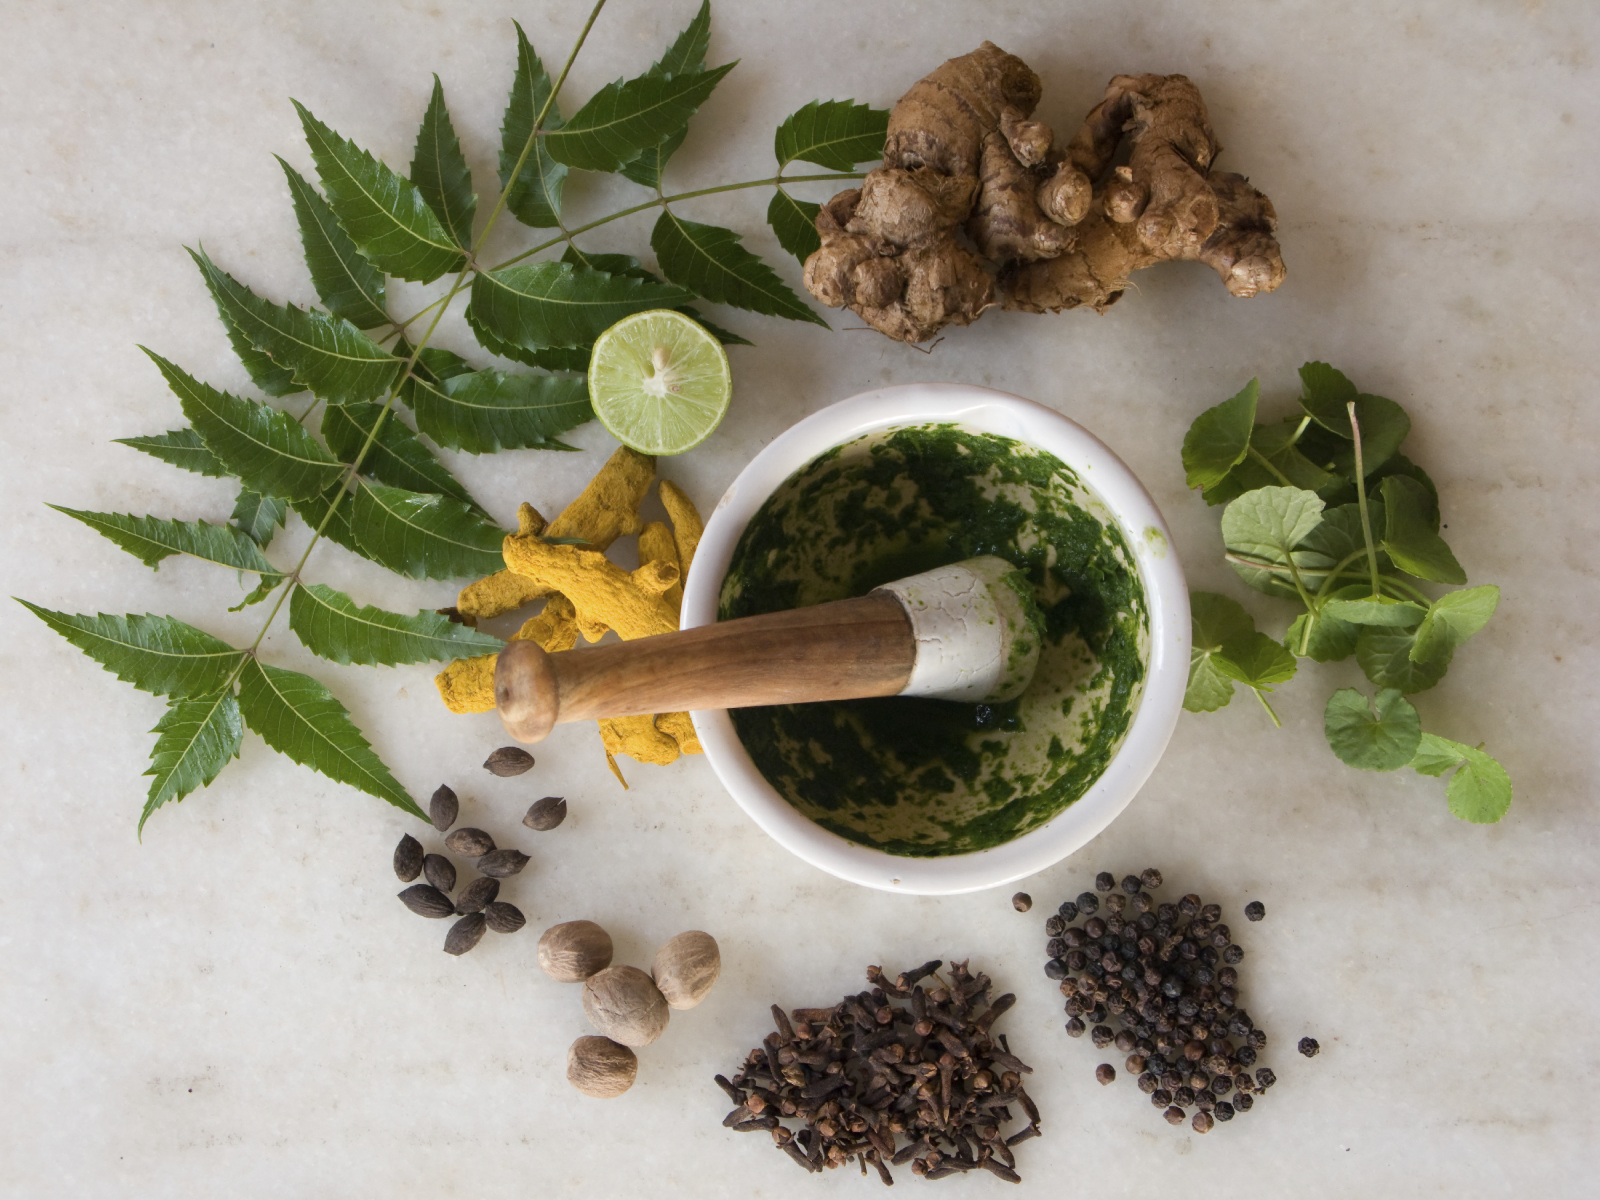 An array of Herbs and spices with a motar and pestle.